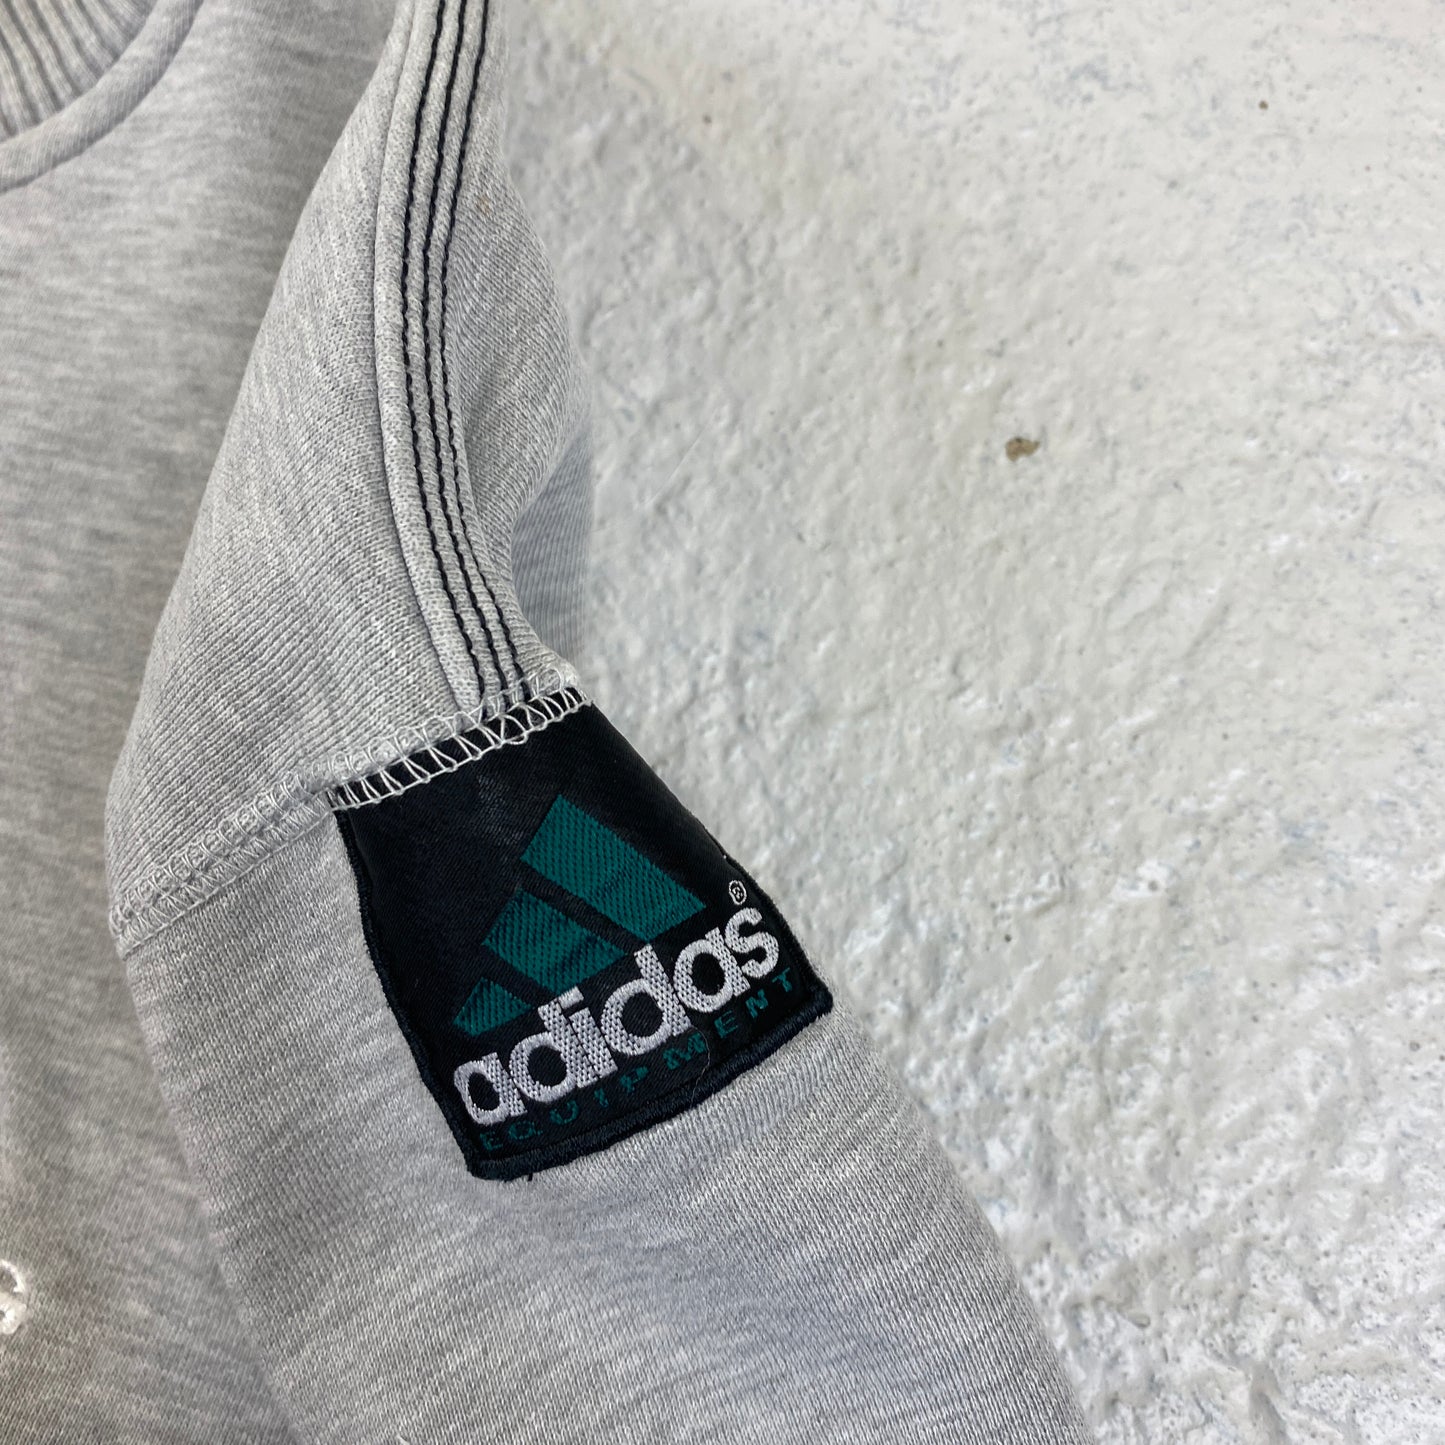 Adidas RARE EQT heavyweight embroidered sweater (S-M)